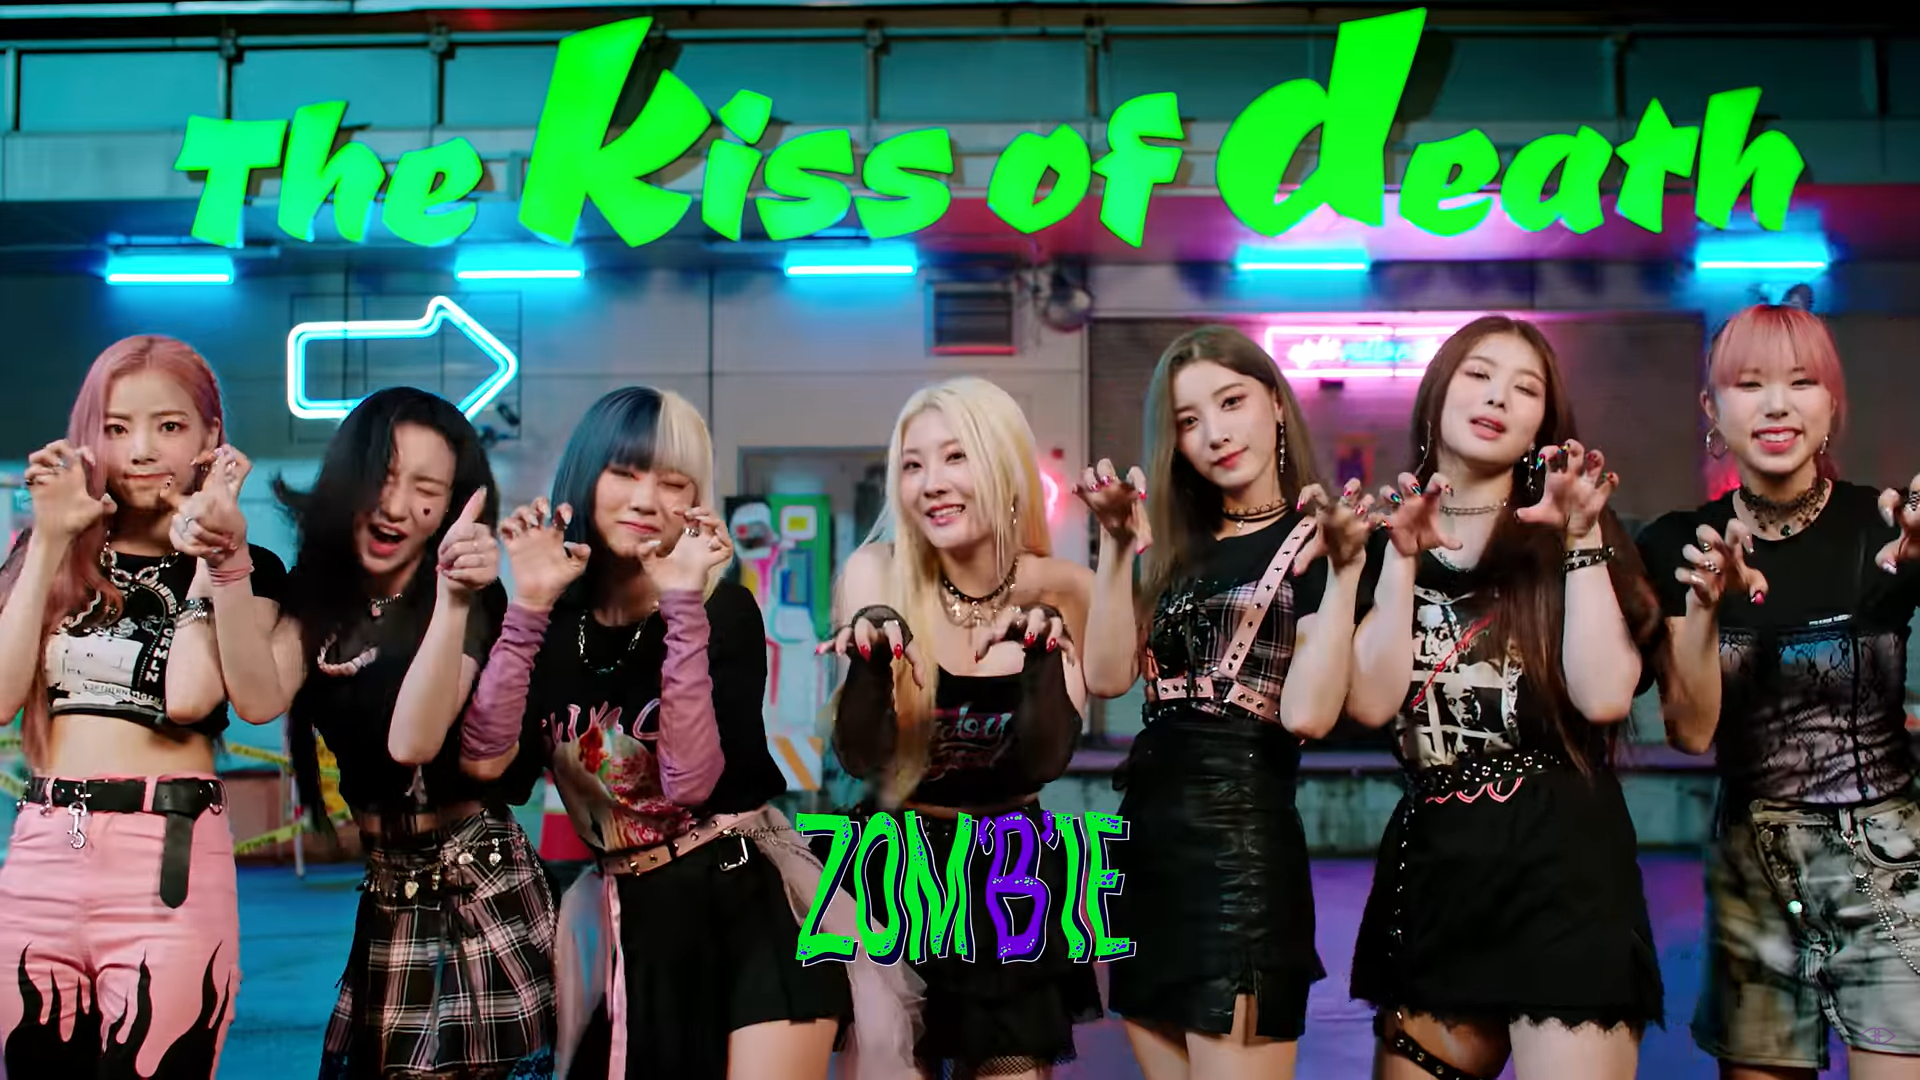 PURPLE KISS join forces with the undead in their 'Zombie' MV! ⋆ The latest kpop news and music